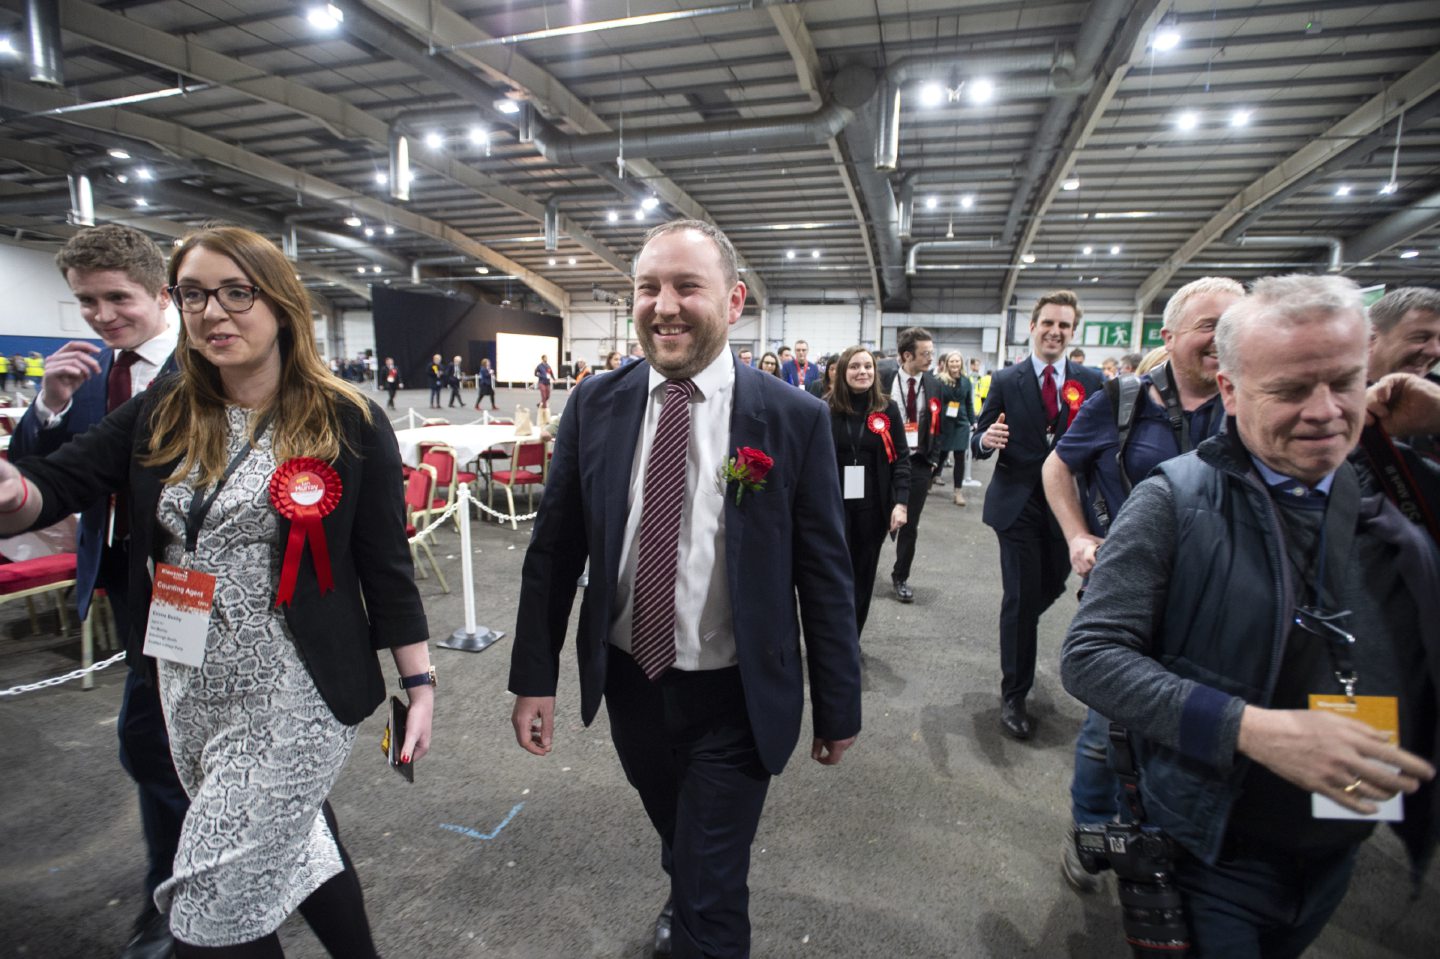 Ian Murray arrives at the general election count at the Royal Highland Centre, Edinburgh, in December where he retained his seat as Labour MP for Edinburgh South.